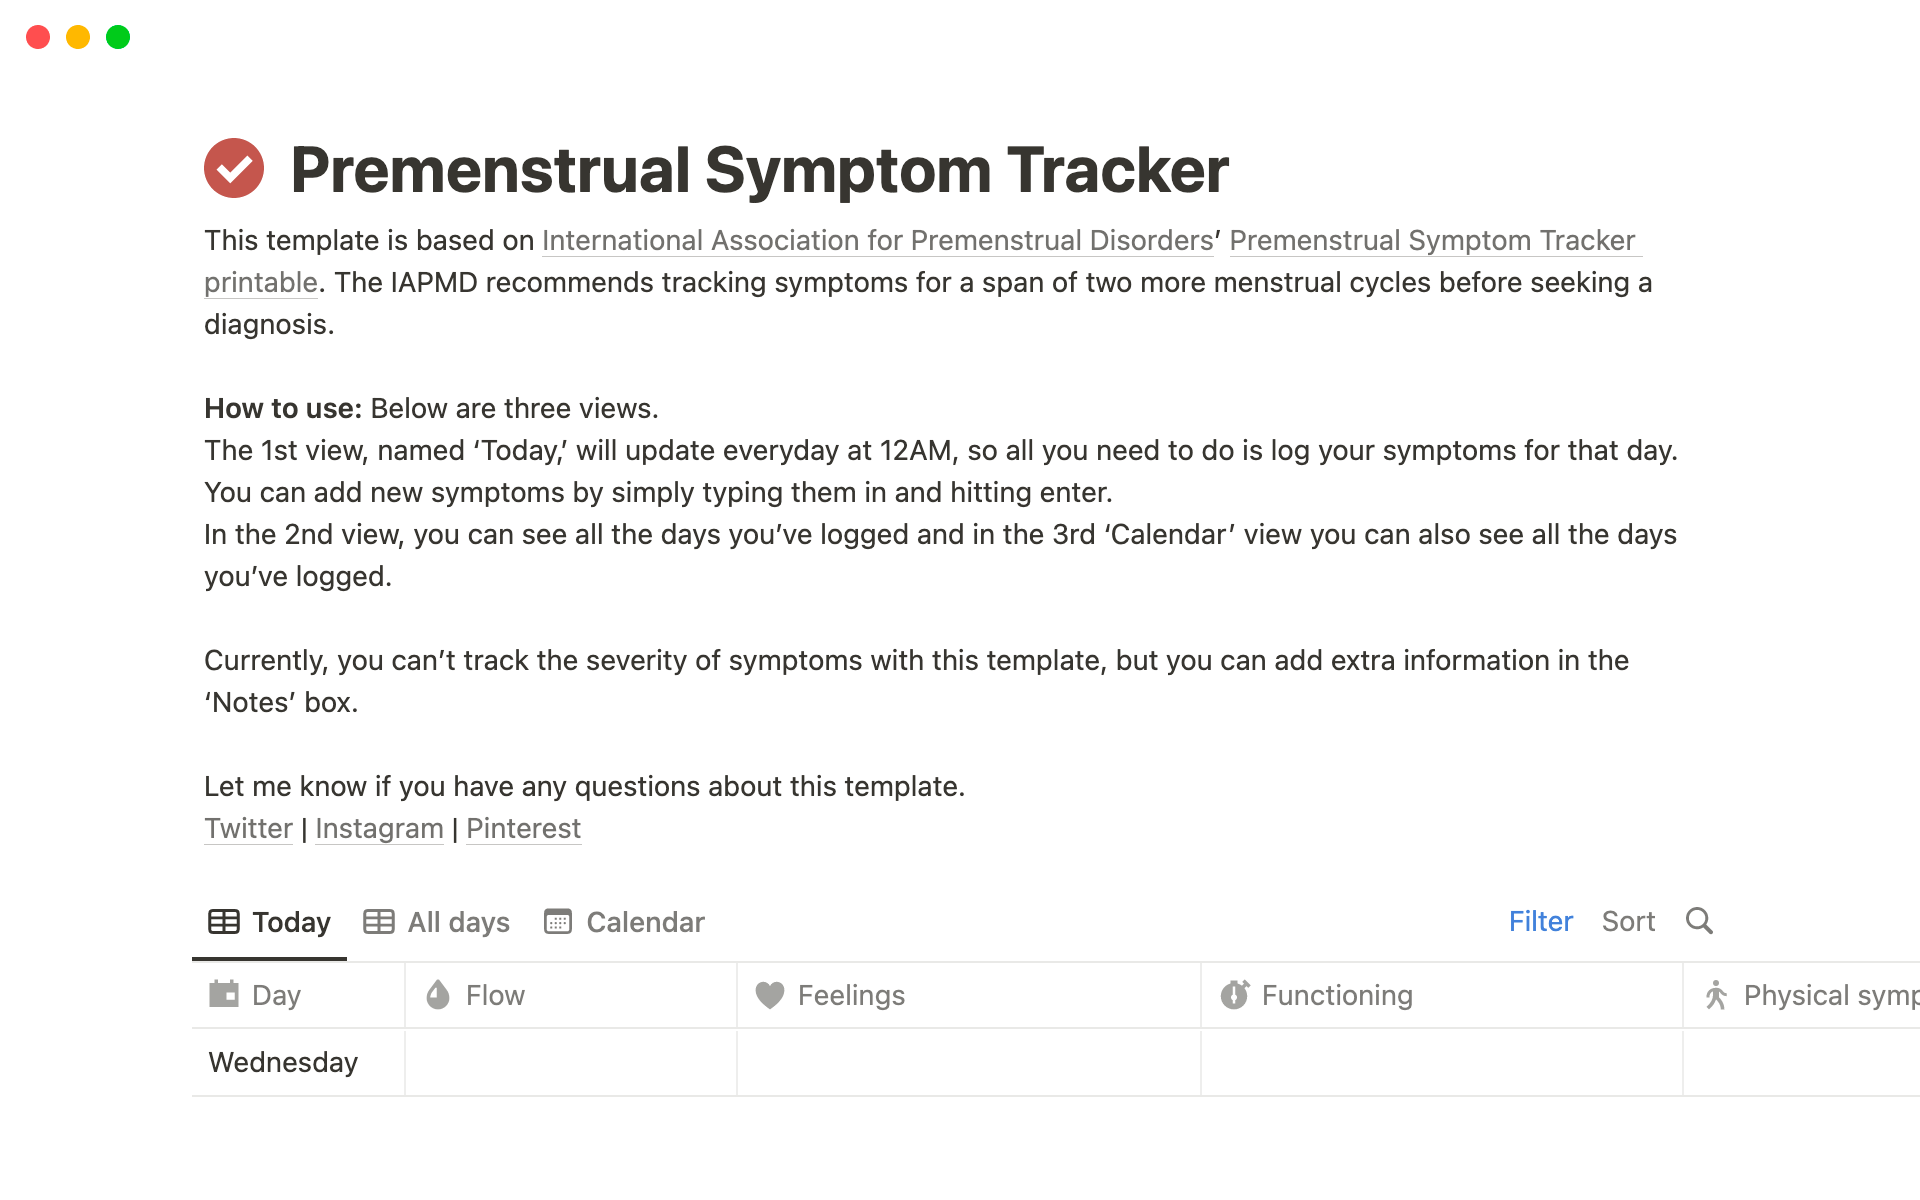 Track your premenstrual symptoms and feelings.